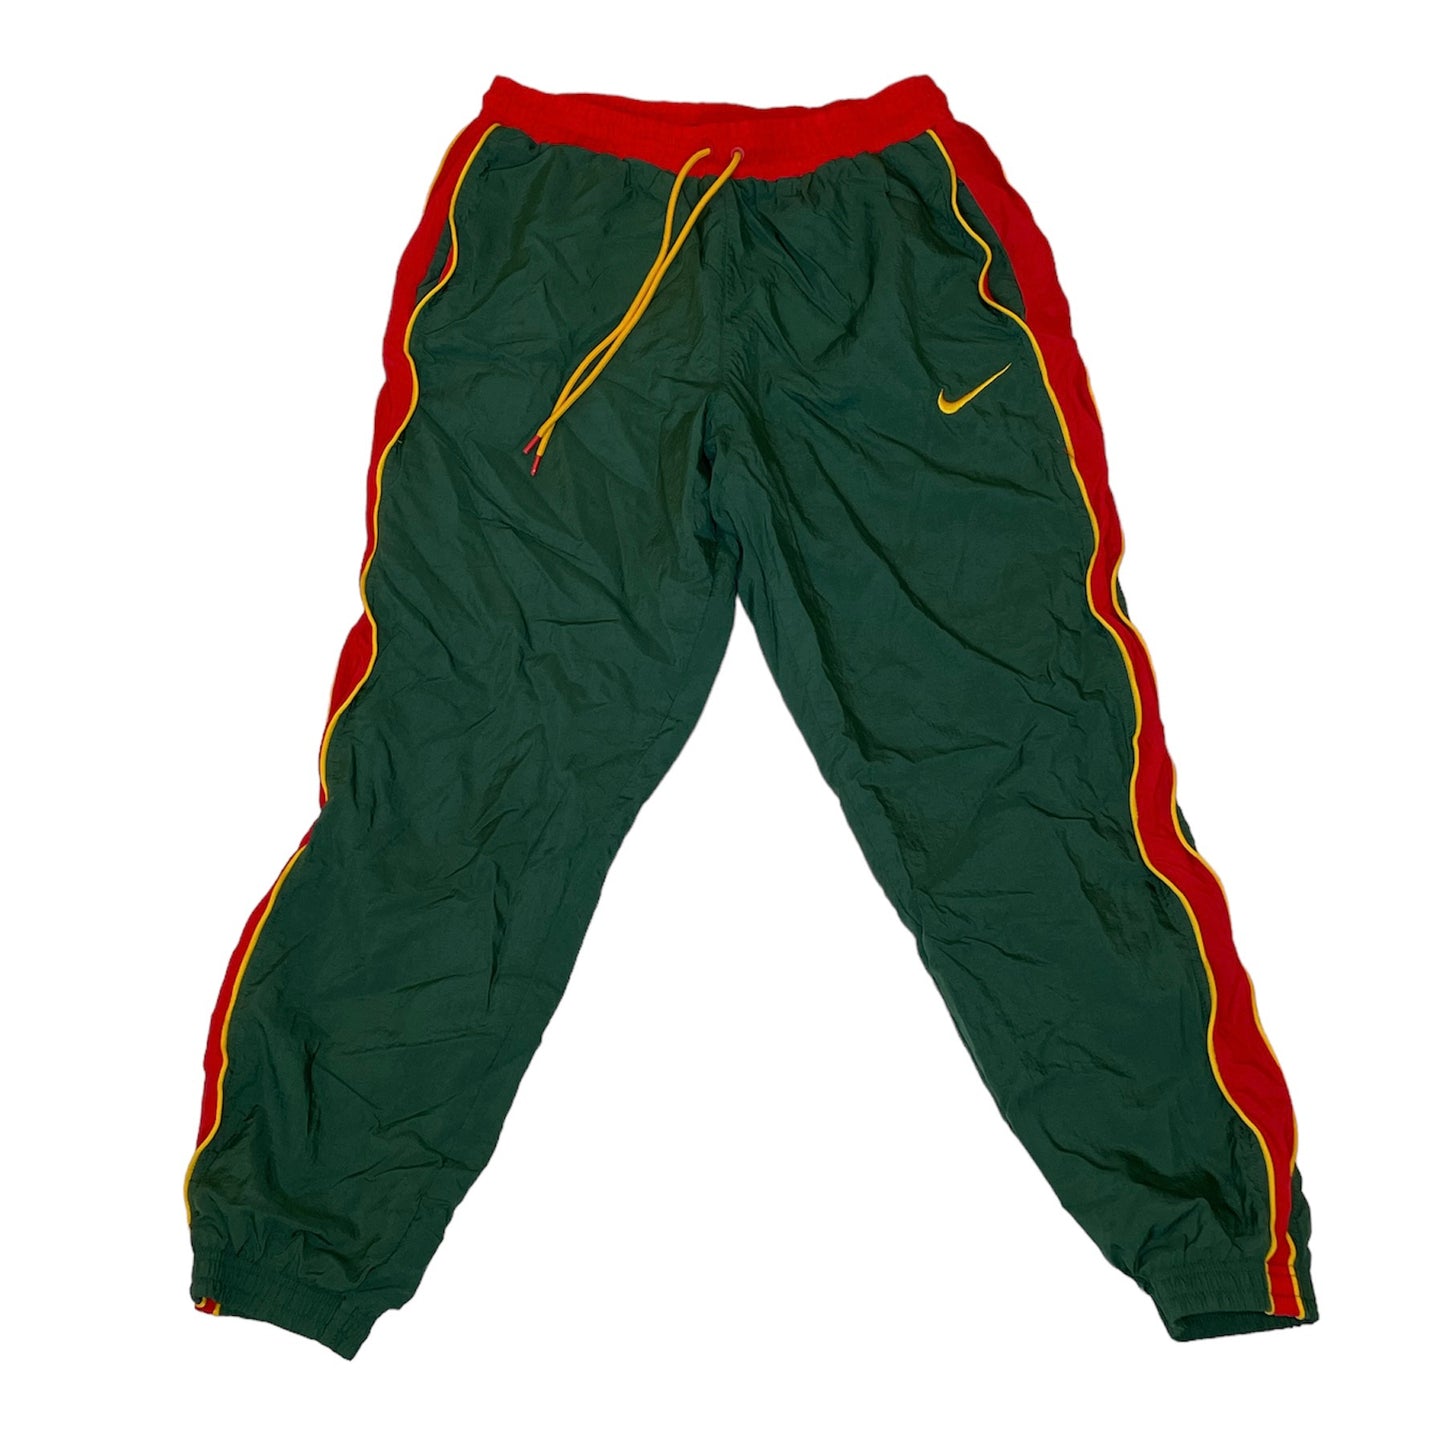 Green Track Joggers - Large